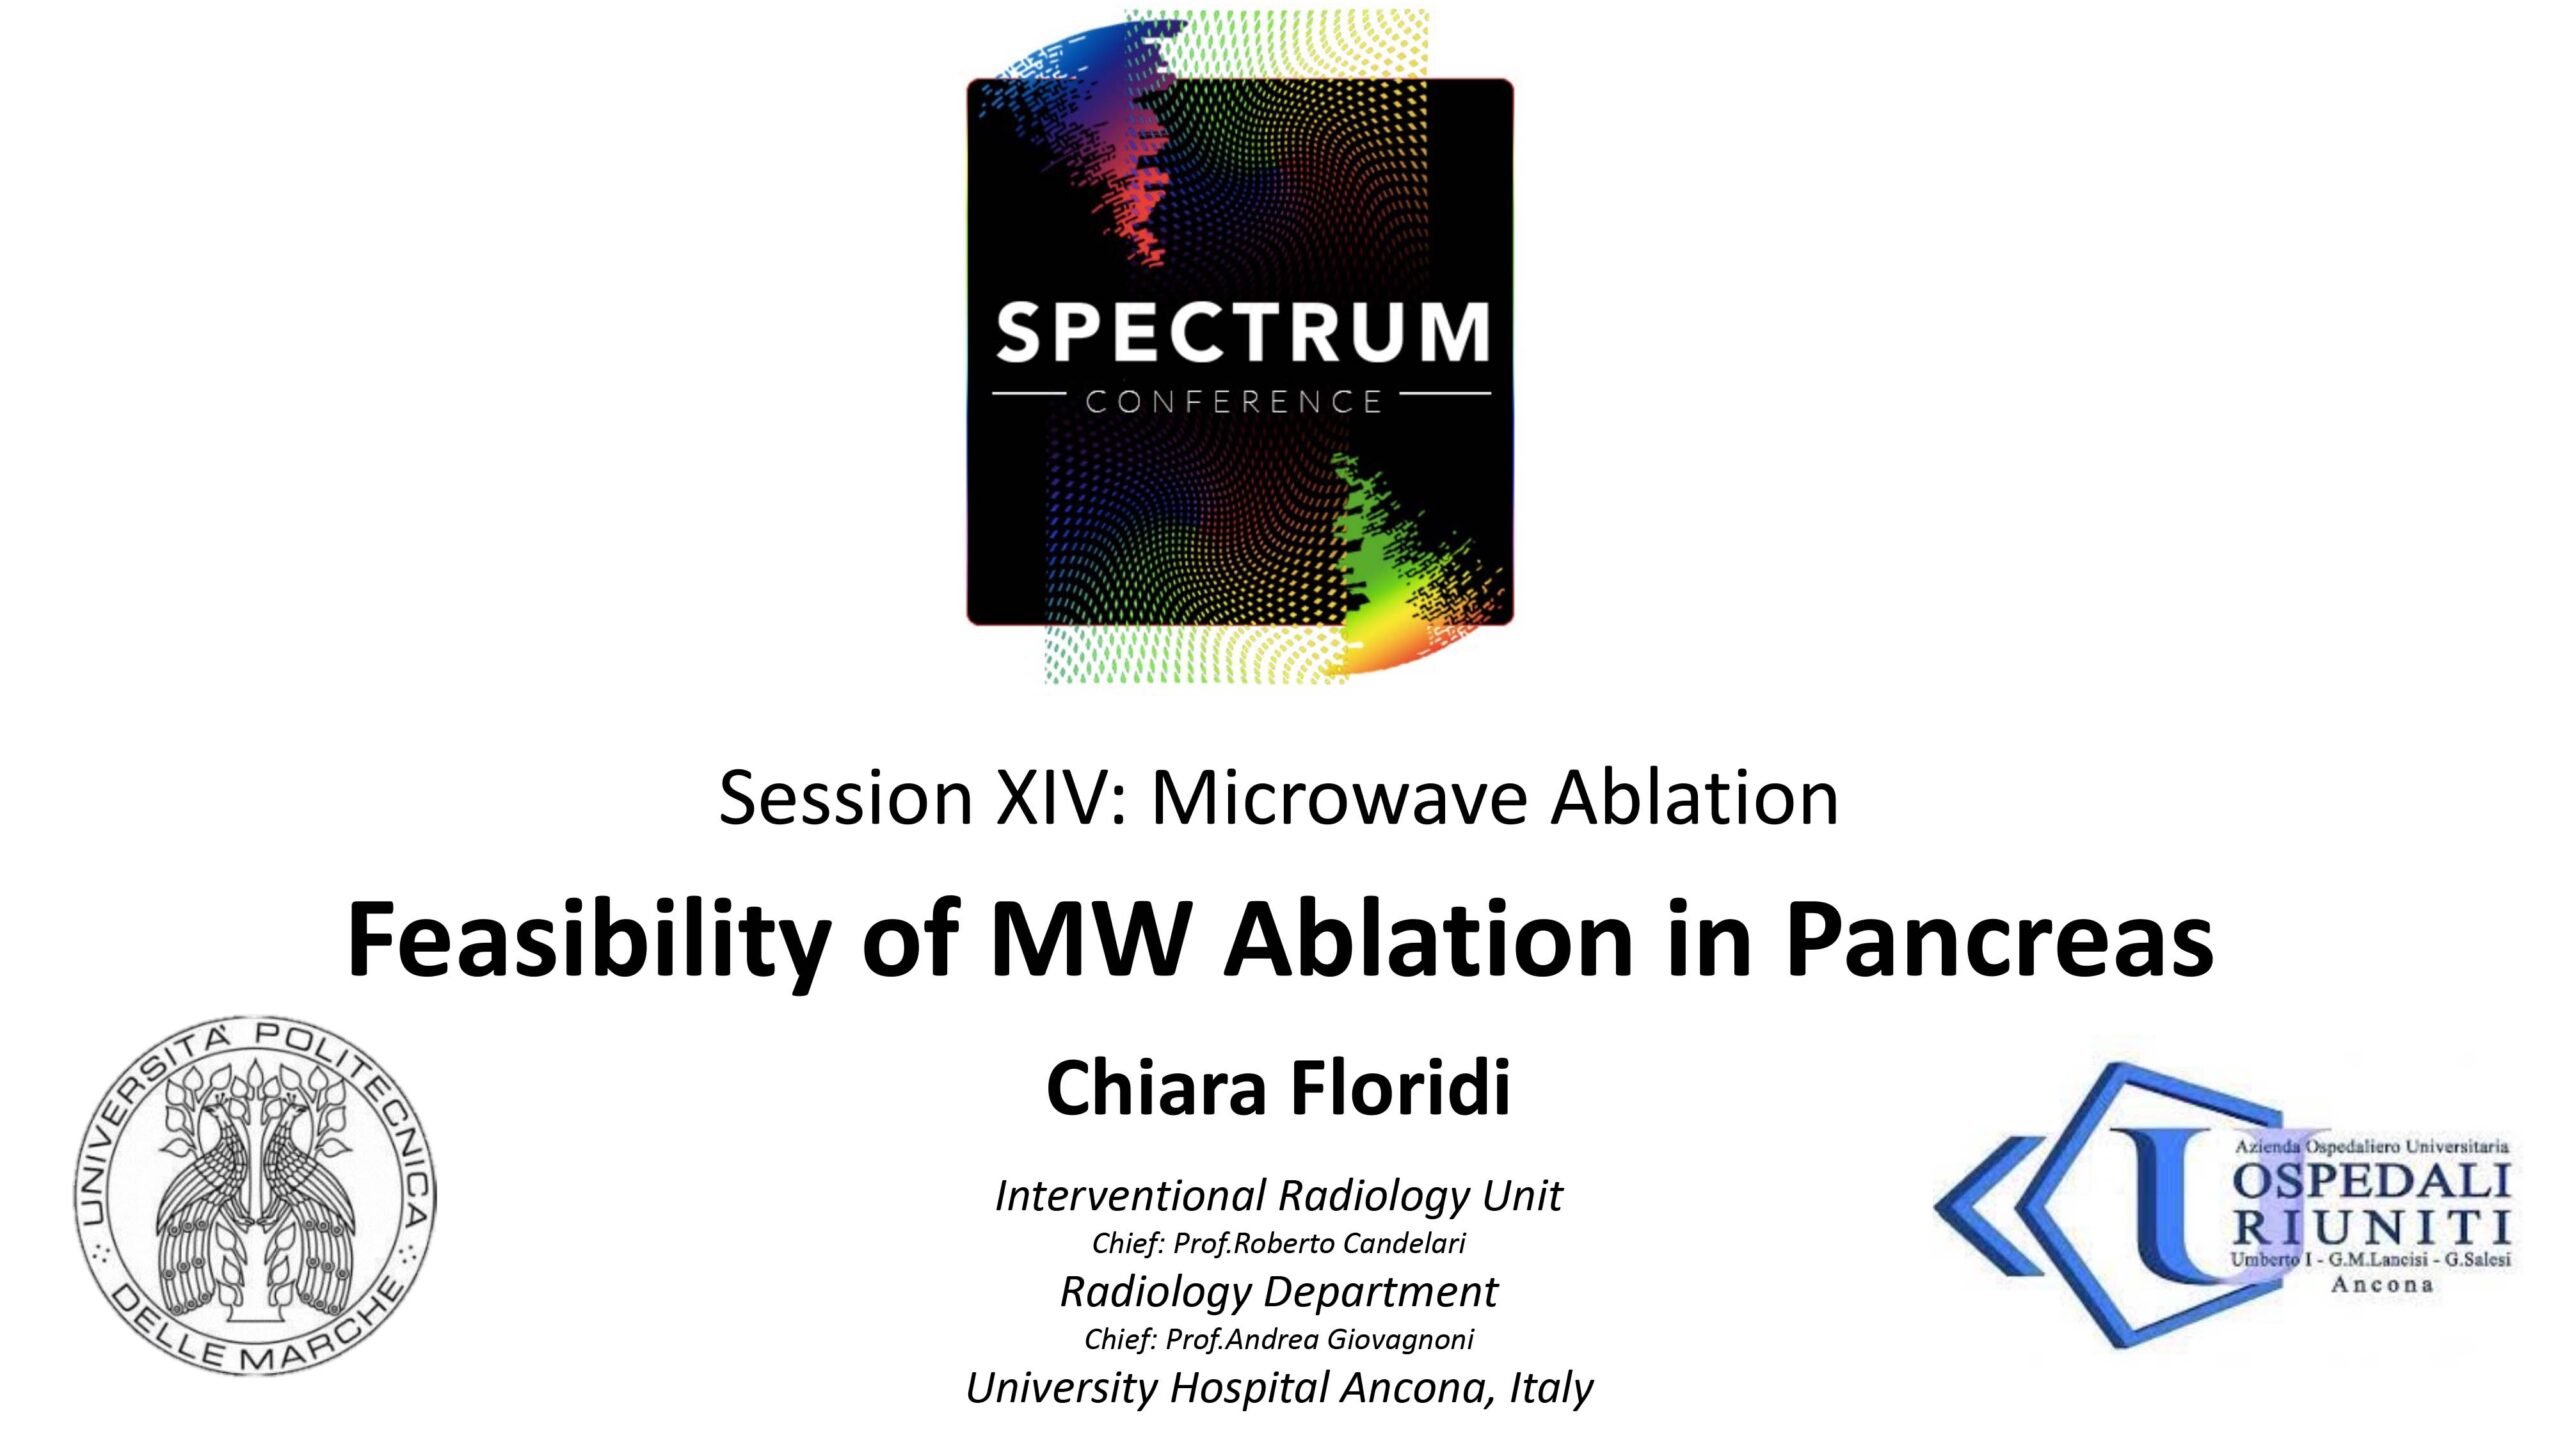 Feasibility of MW Ablation in Pancreas